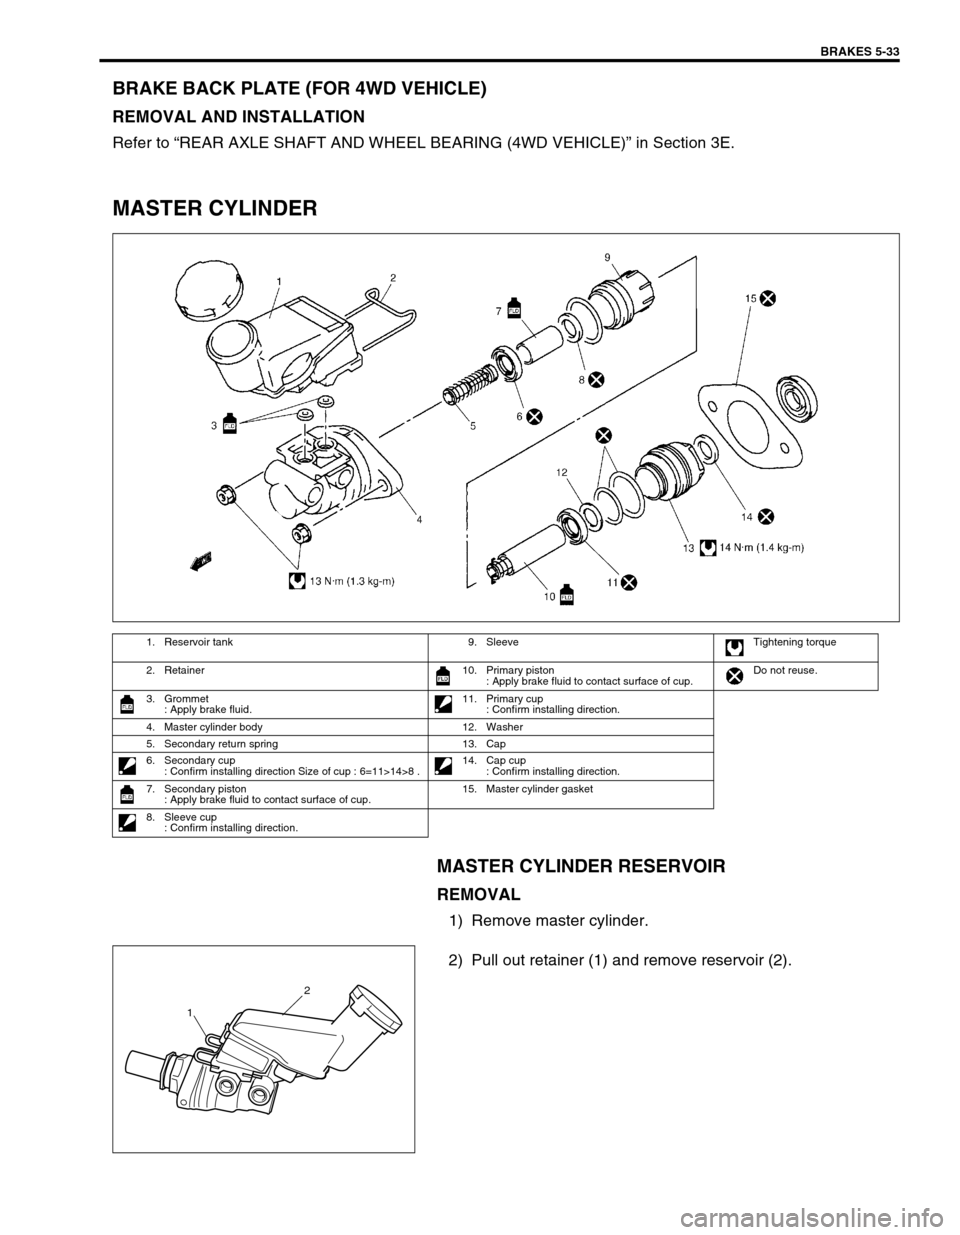 SUZUKI SWIFT 2000 1.G RG413 Service Workshop Manual BRAKES 5-33
BRAKE BACK PLATE (FOR 4WD VEHICLE)
REMOVAL AND INSTALLATION
Refer to “REAR AXLE SHAFT AND WHEEL BEARING (4WD VEHICLE)” in Section 3E.
MASTER CYLINDER
MASTER CYLINDER RESERVOIR
REMOVAL
